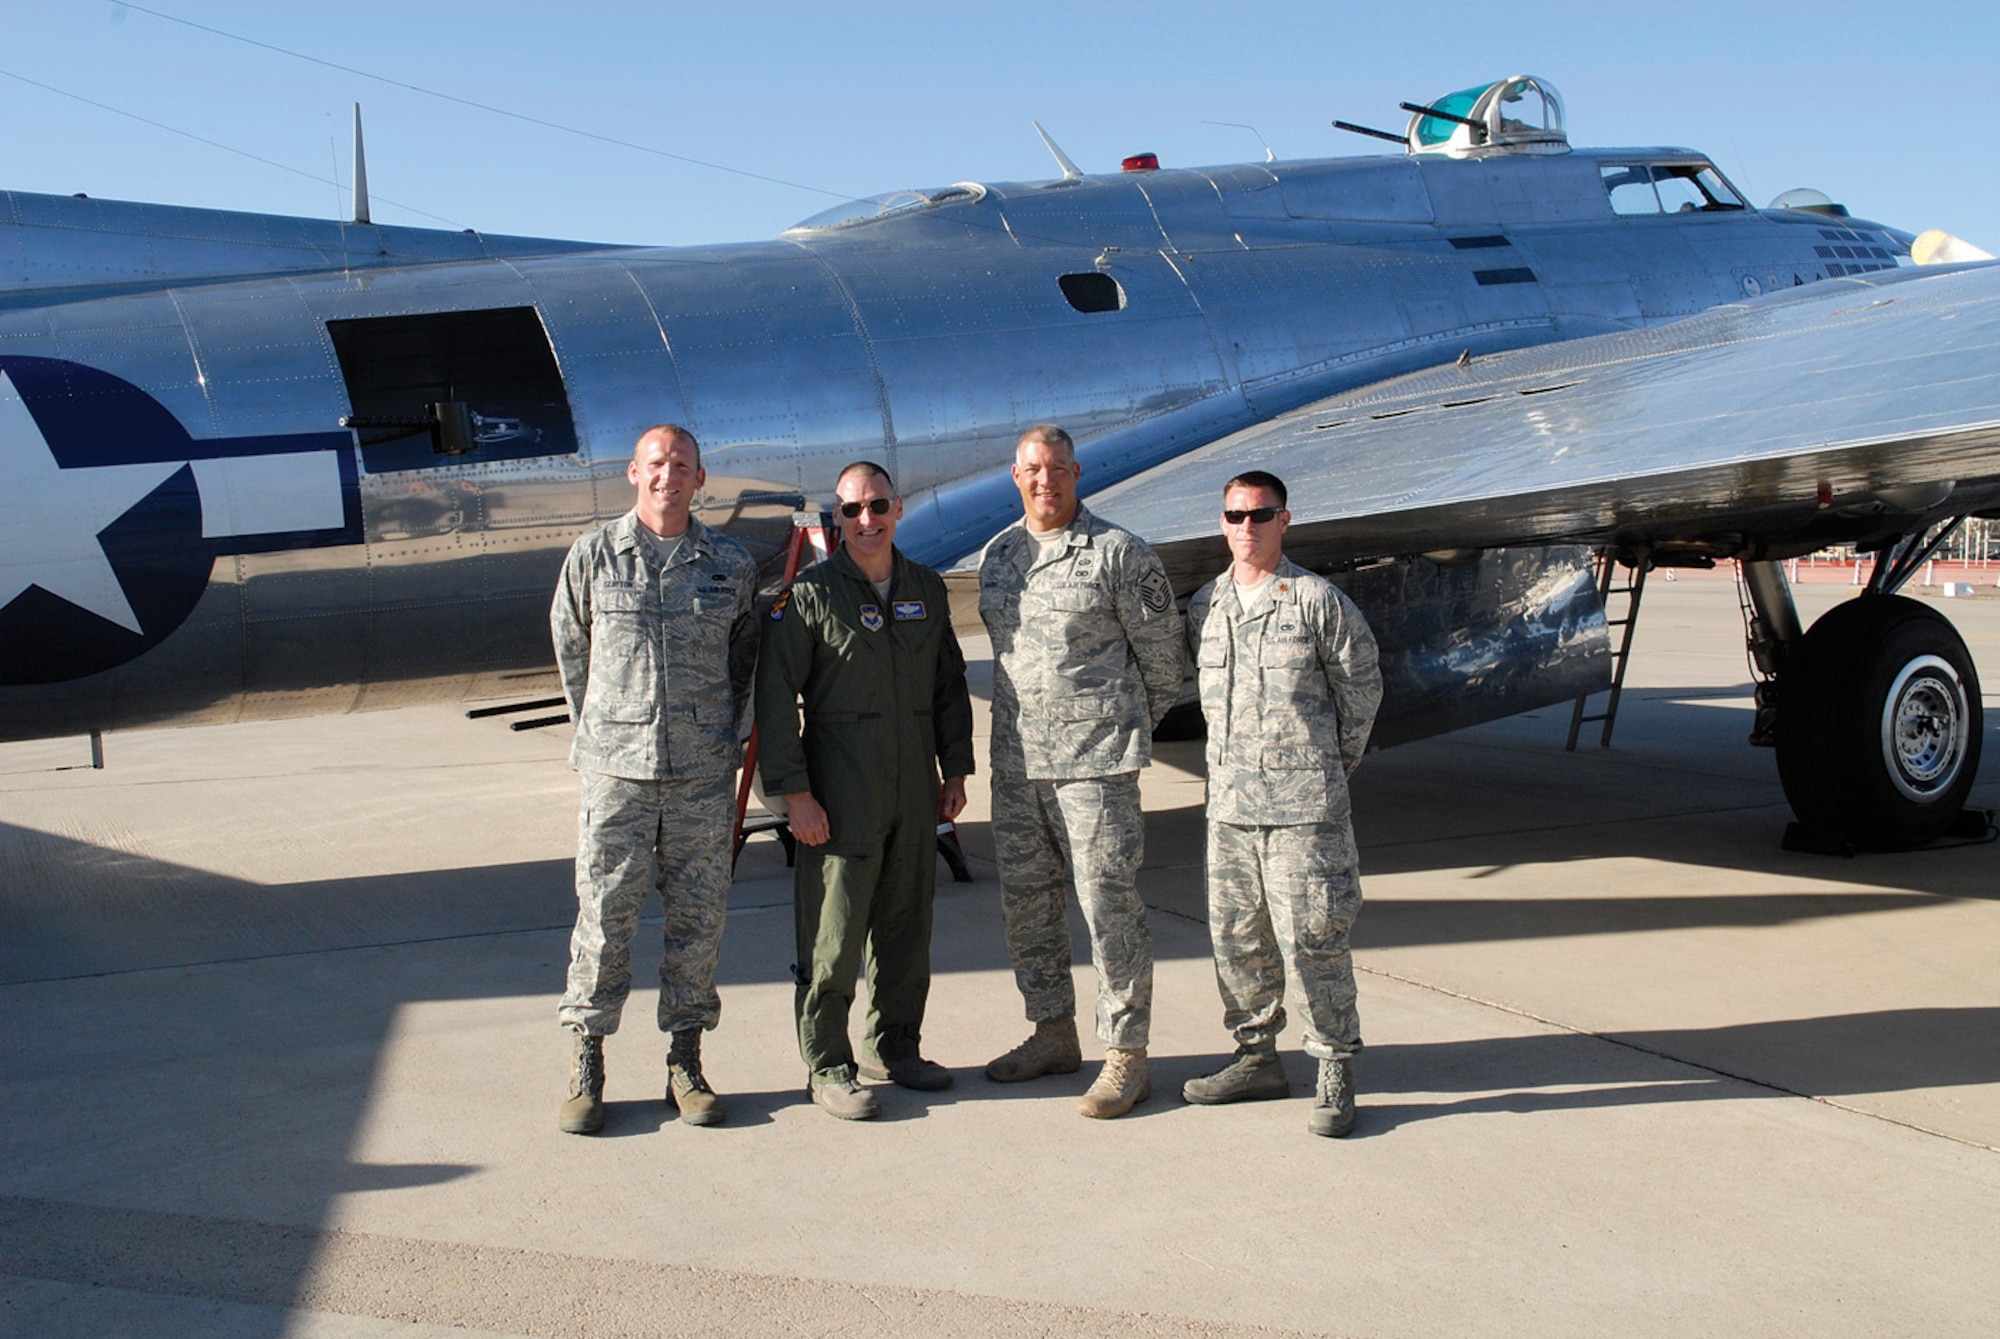 Brig. Gen. Kurt Neubauer, 56th Fighter Wing commander, stands in front of the Sentimental Journey, a B-17 bomber, with Annual Award winners 1st Lt. Robert Slaydon, 62nd  Aircraft Maintenance Unit;  Master Sgt. Scott Harris, 56th Security Forces Squadron and Maj. Brian Shawaryn, 756th AMU, after an incentive flight Sunday. (U.S. Air Force photo/Staff Sgt. Ian Dean)